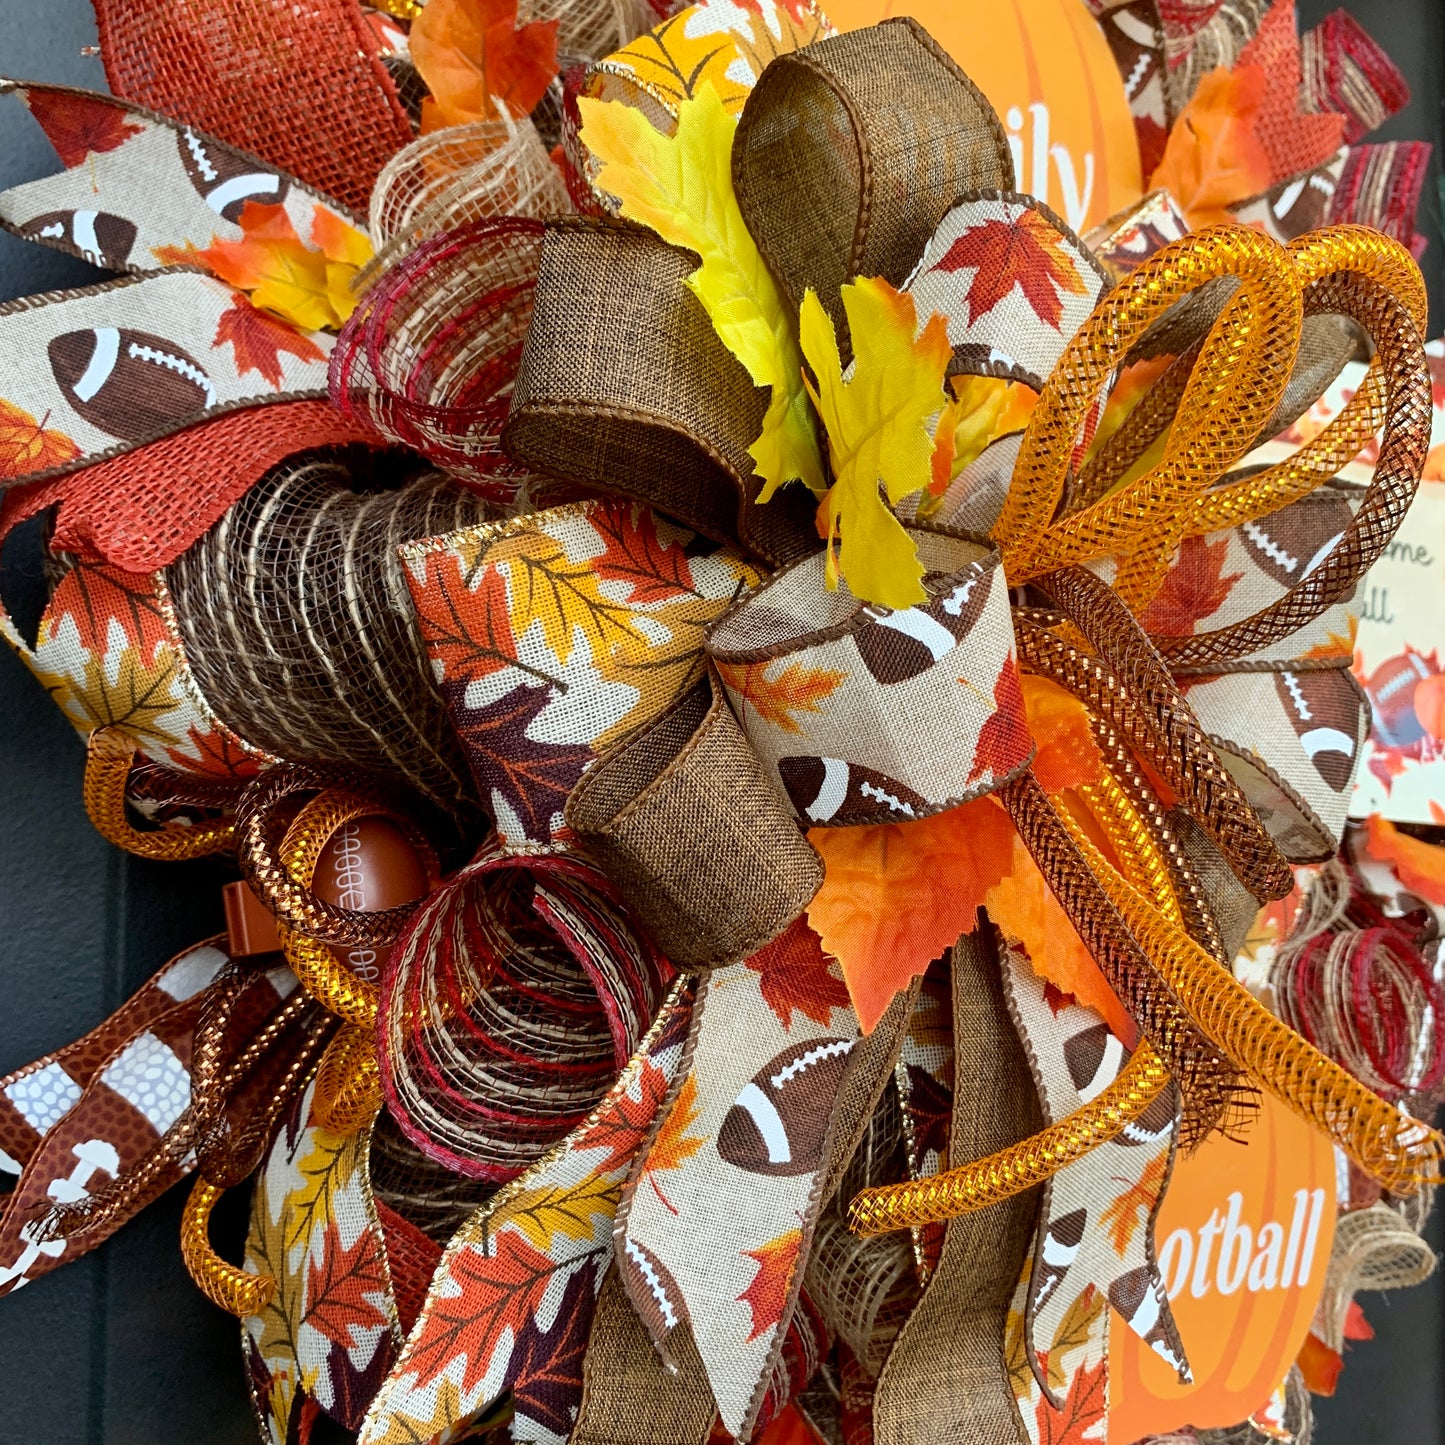 Family Football, Welcome Fall Wreath For Front Door, Friends and Family Wreath, Football Wreath